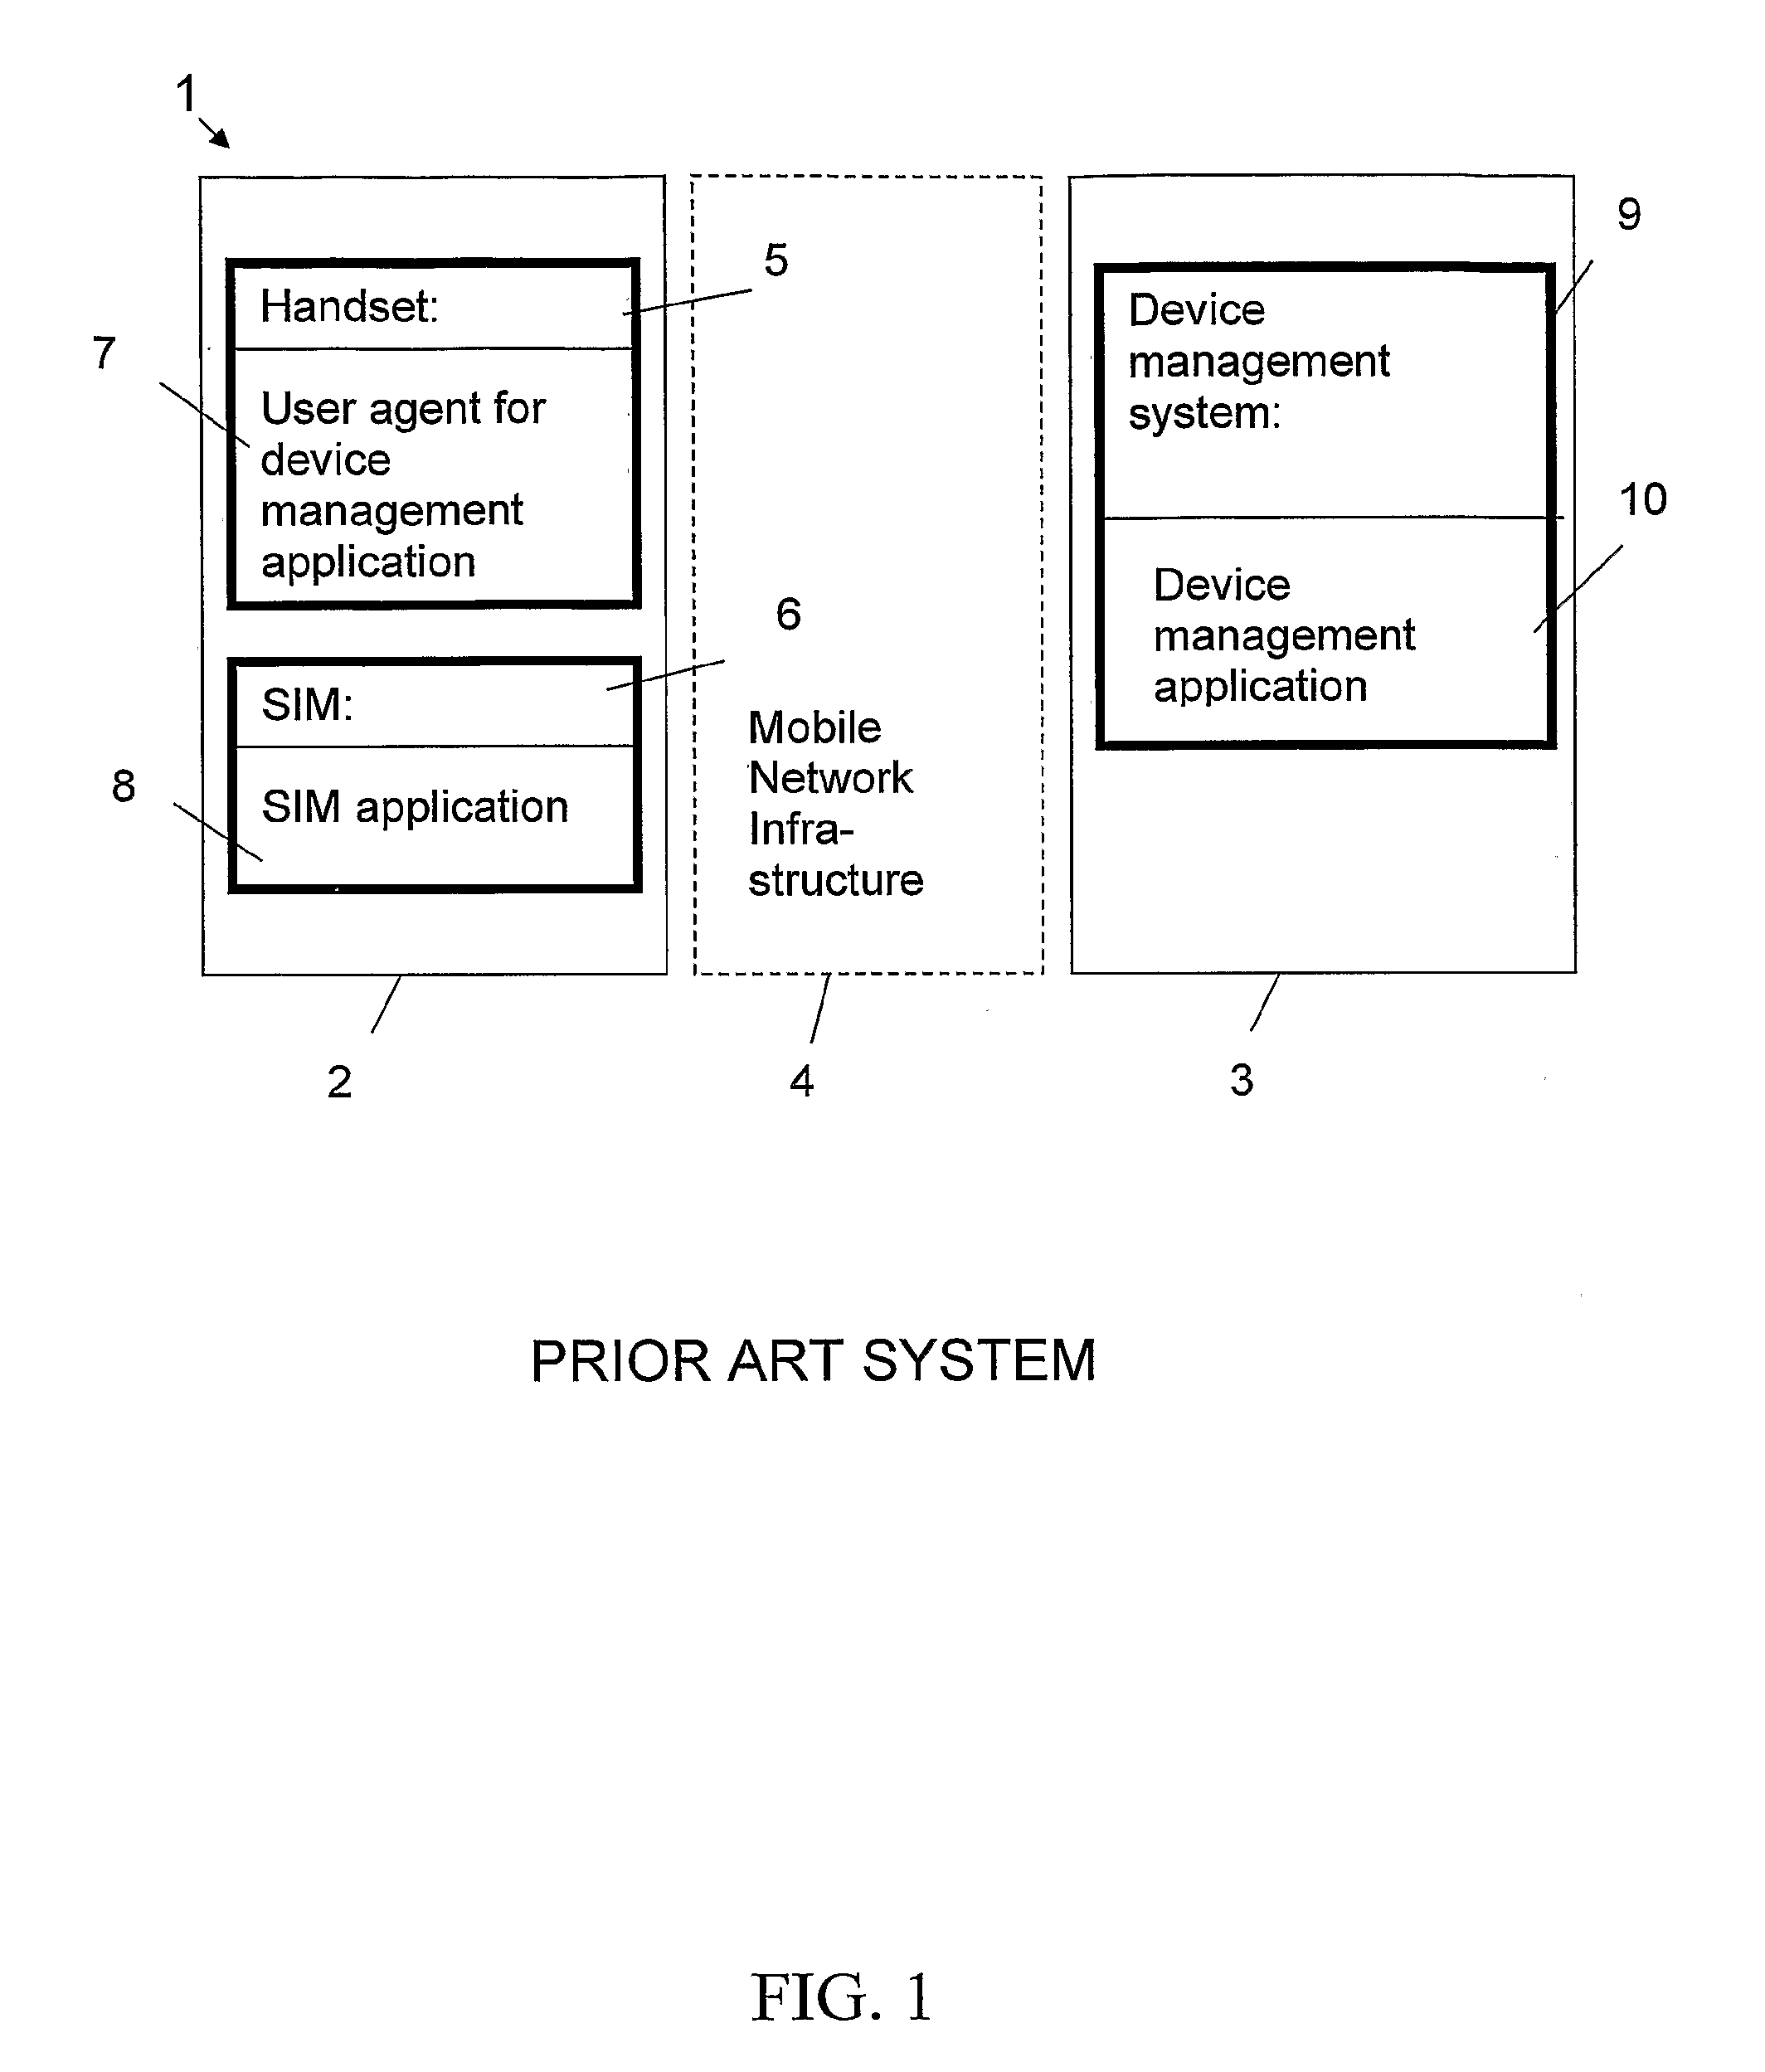 Method and System for Device Discovery